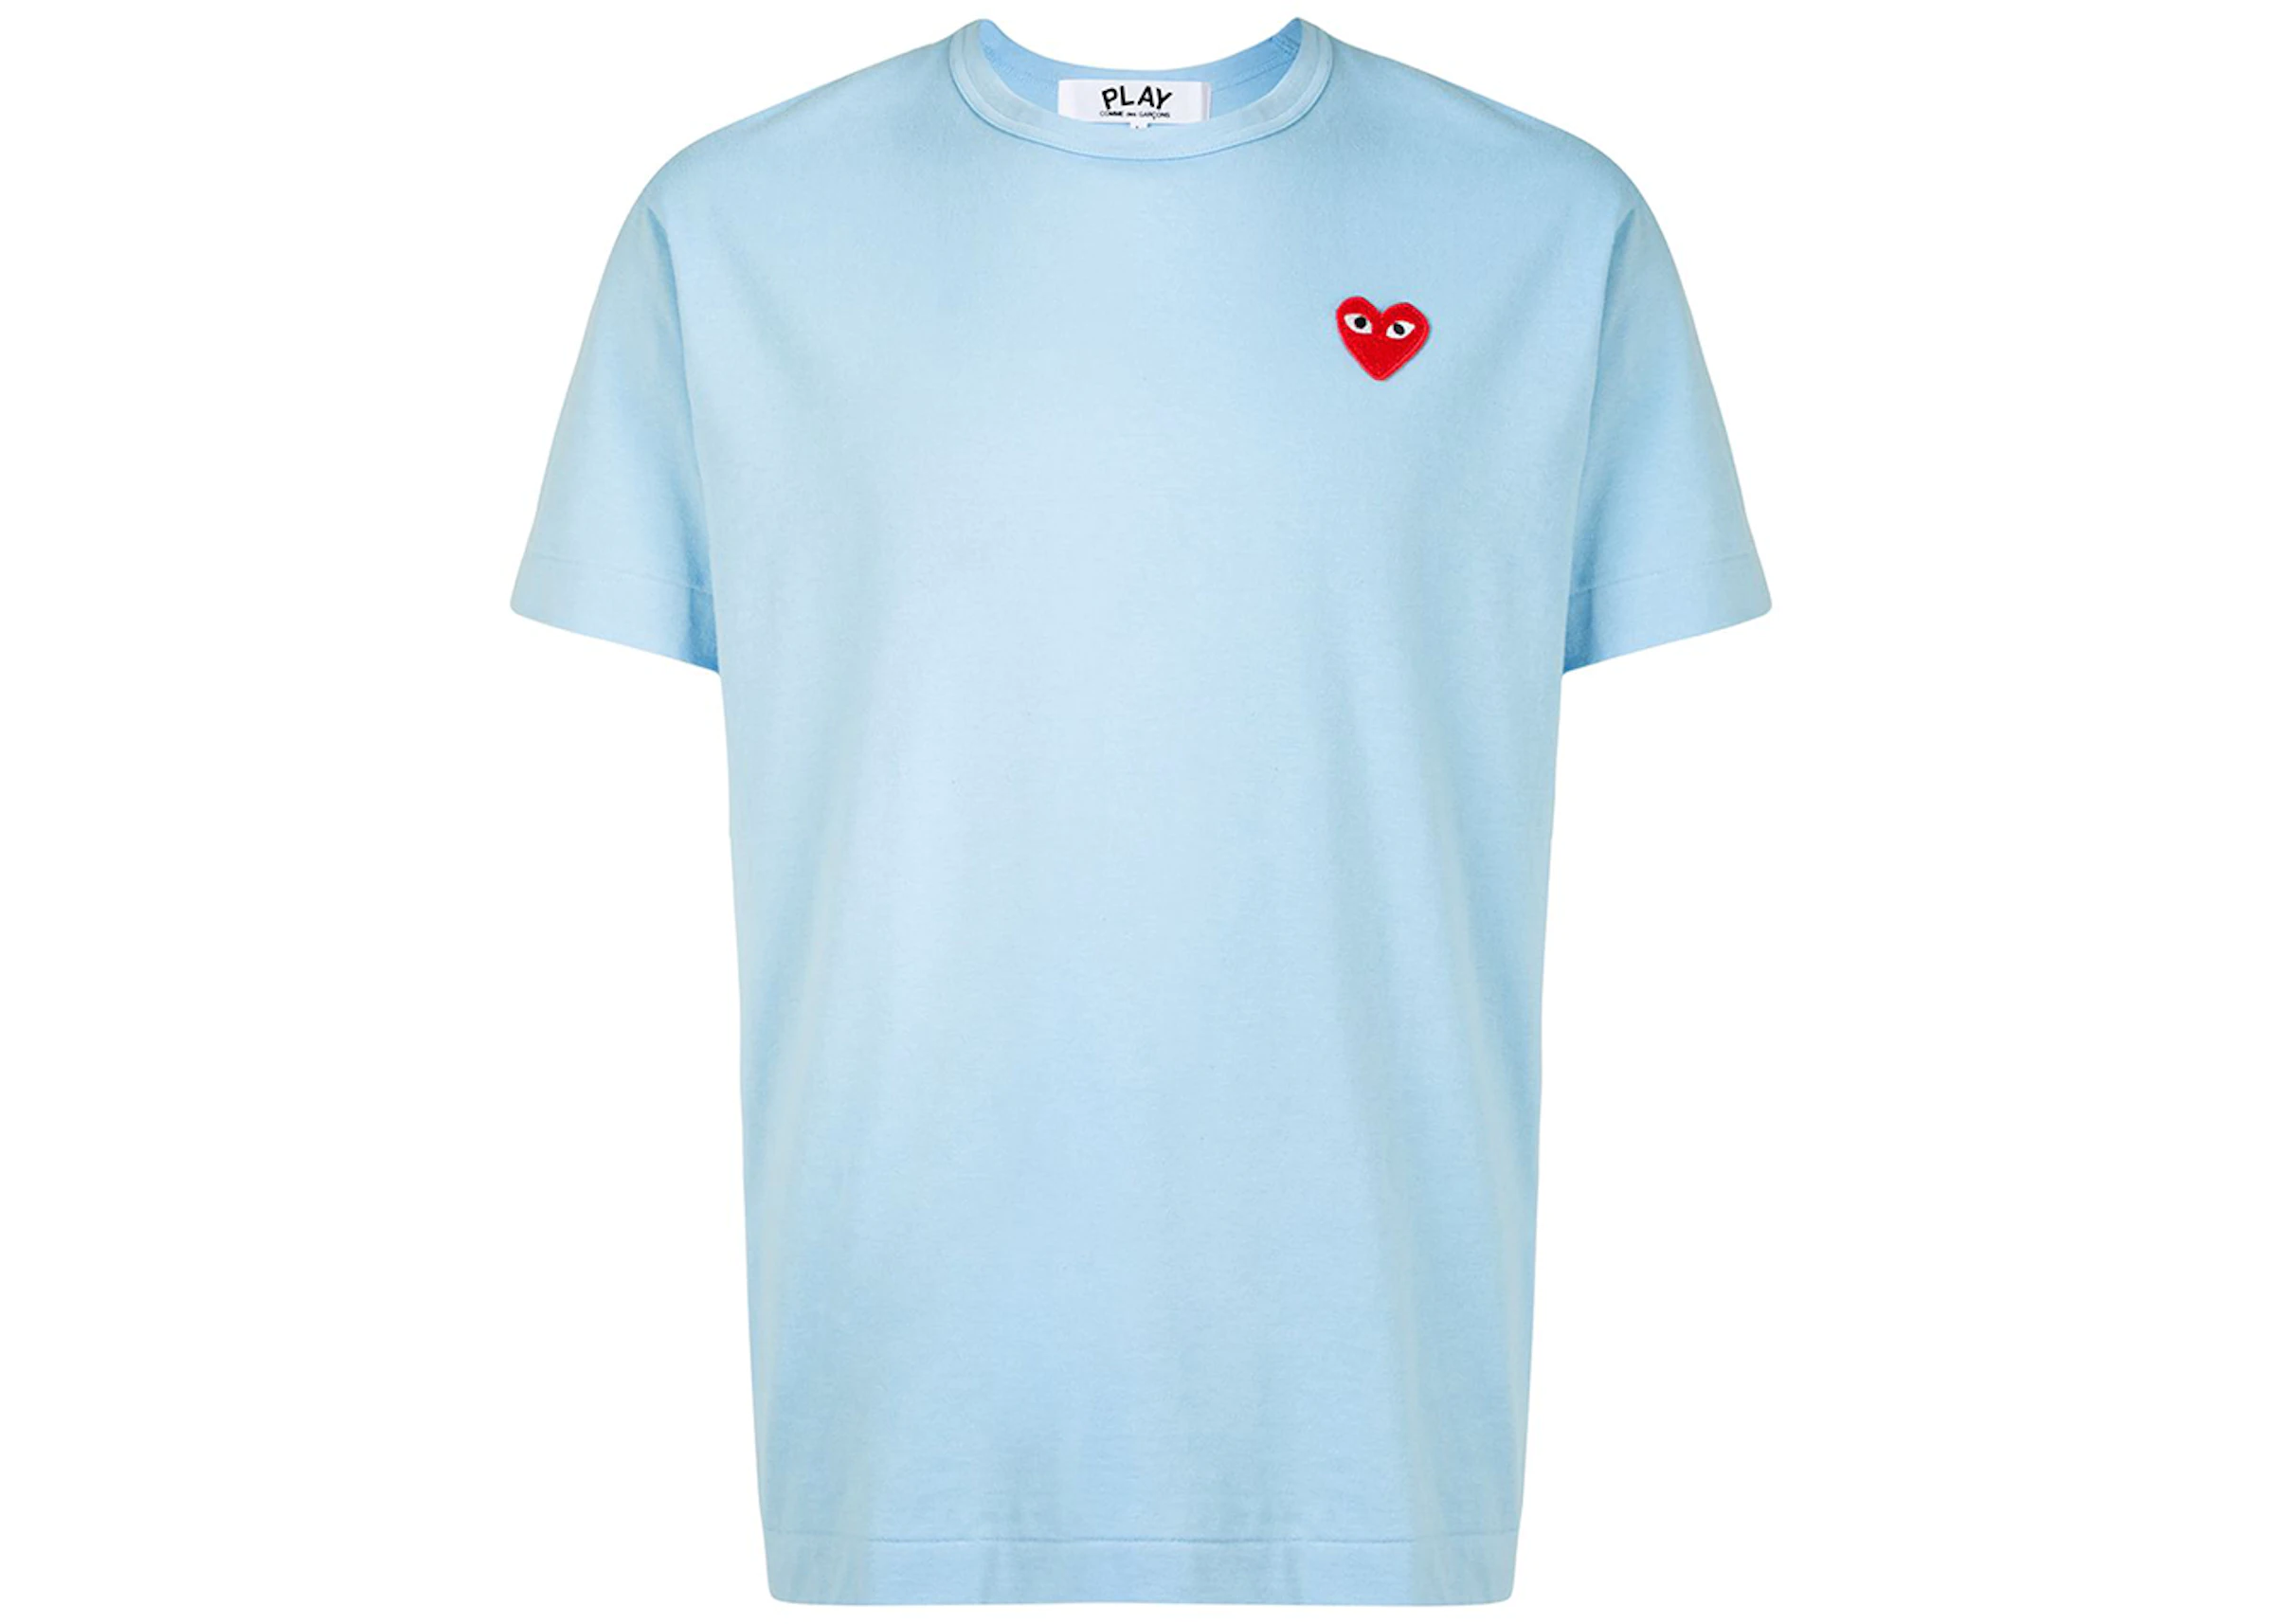 Executie grond Schepsel CDG Play Logo Embroidered Tee Baby Blue/Red - US